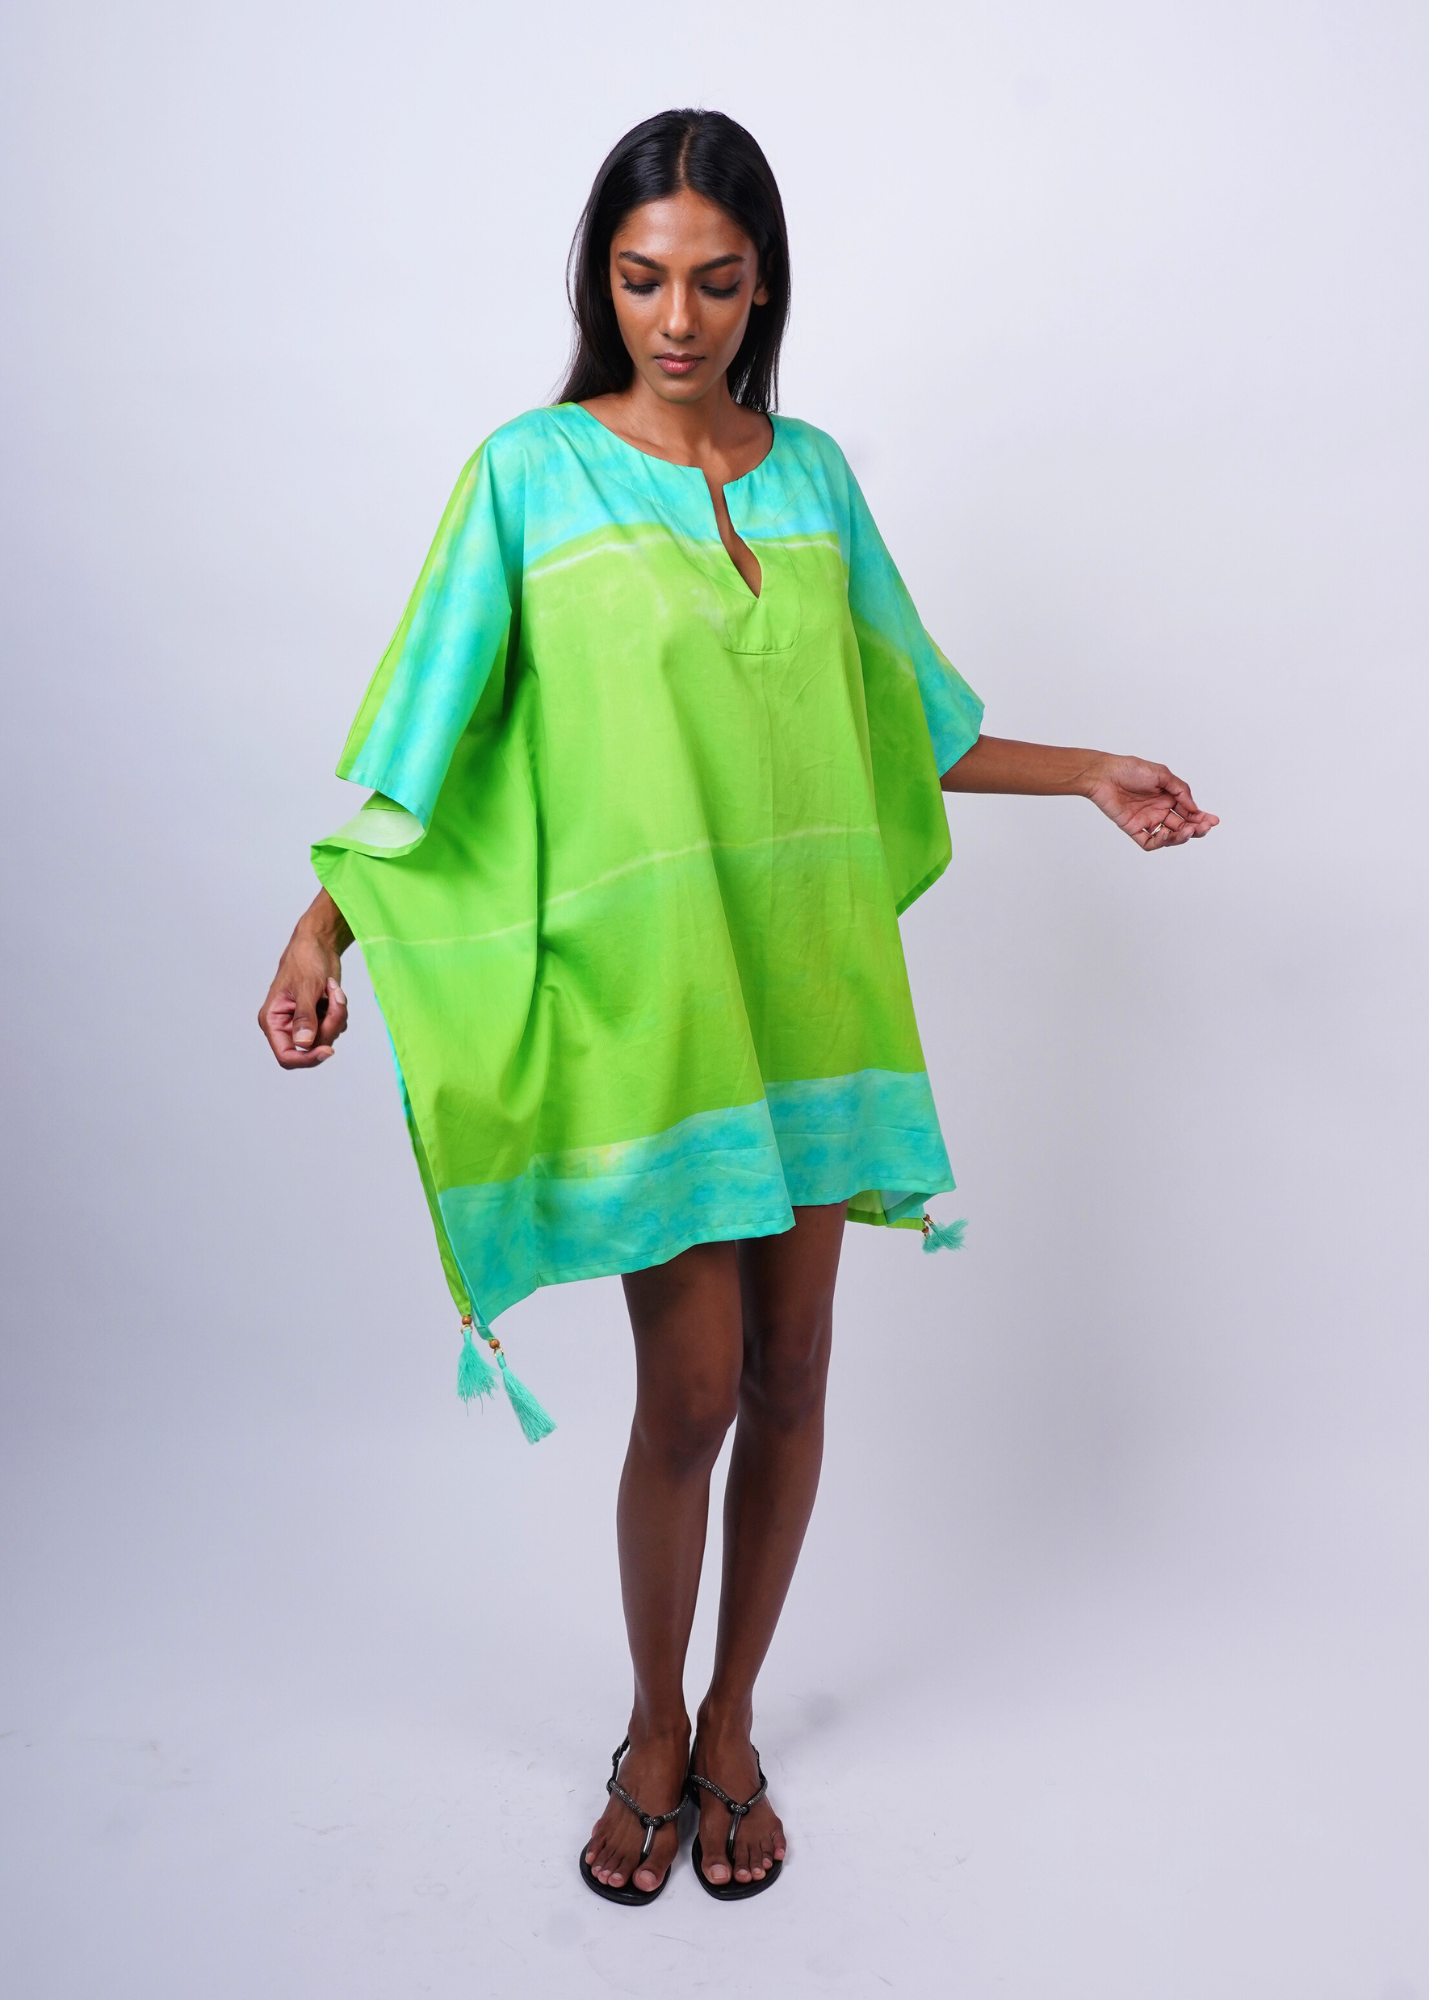 Short Caftan - Key Lime, a product by Azurina